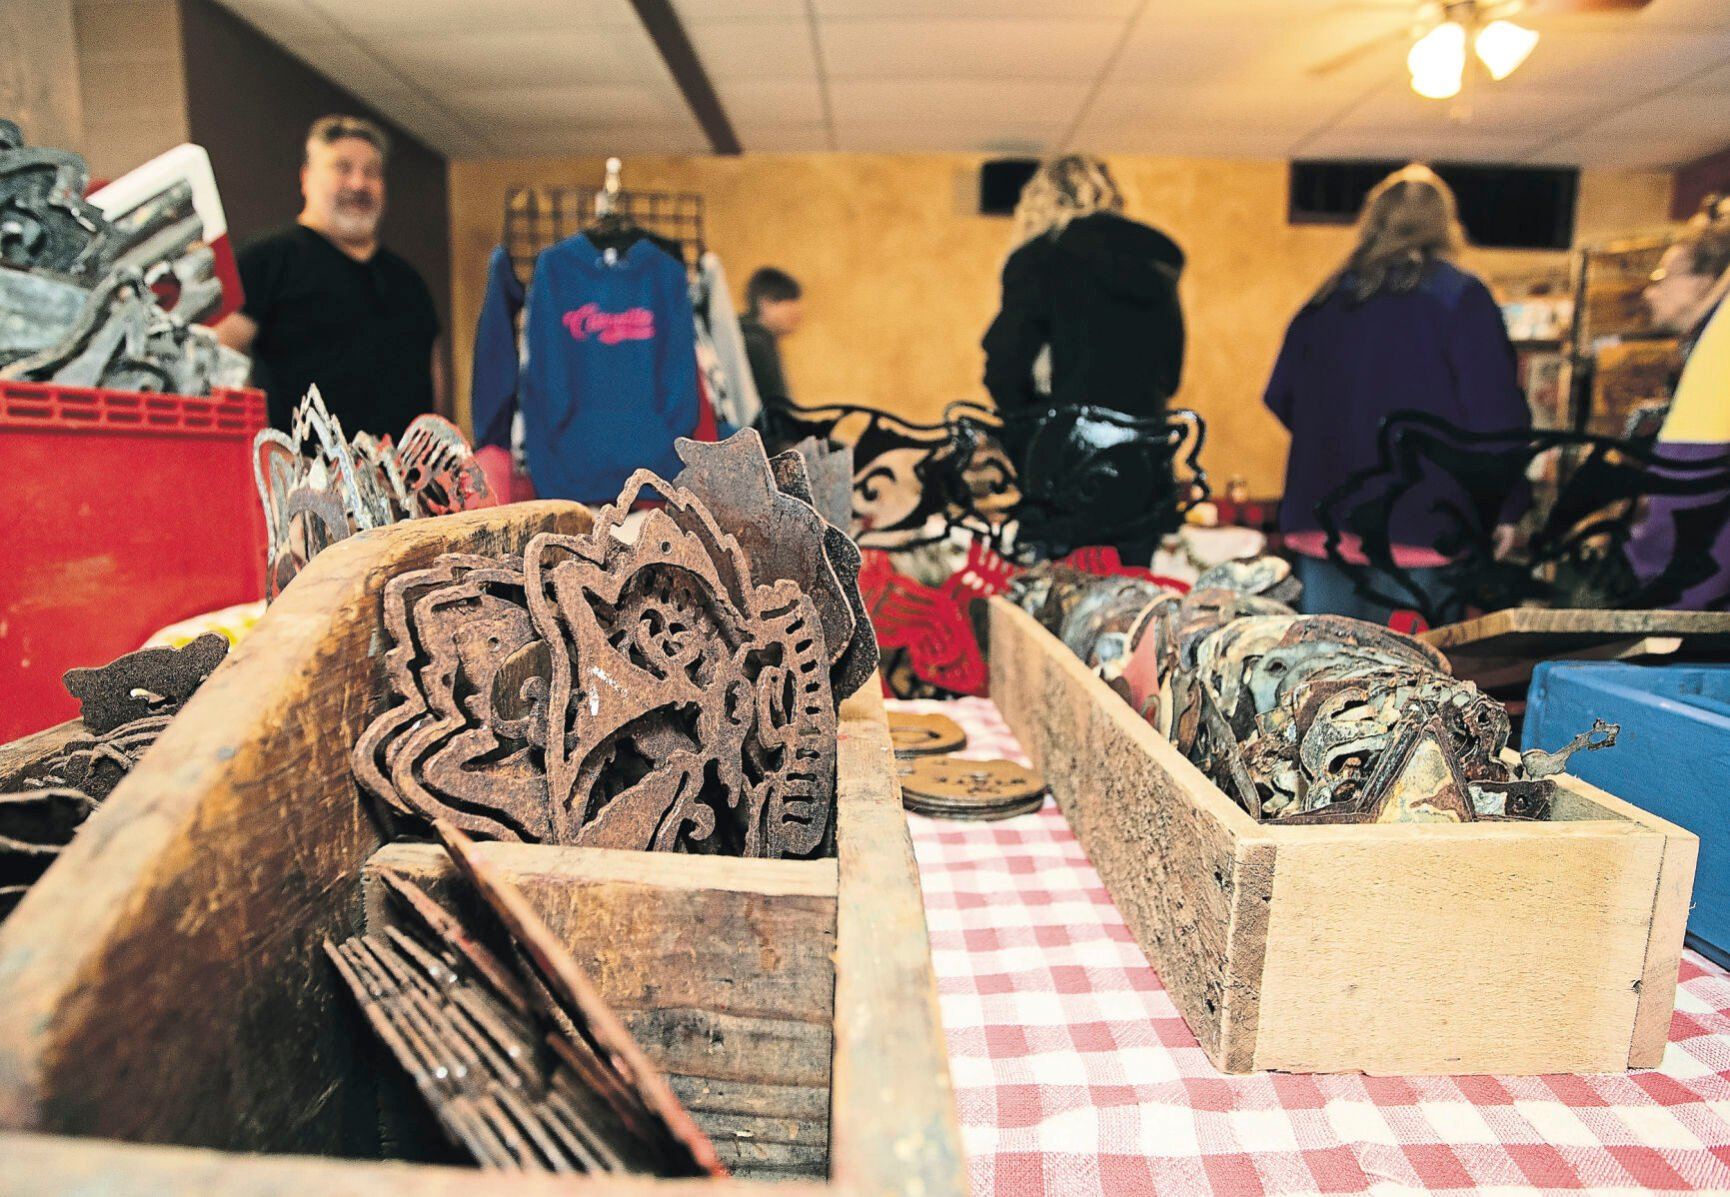 Shoppers look at the creations from Big River Rustics at a craft fair held at J&J’s Sandbar in Cassville, Wis.    PHOTO CREDIT: Stephen Gassman